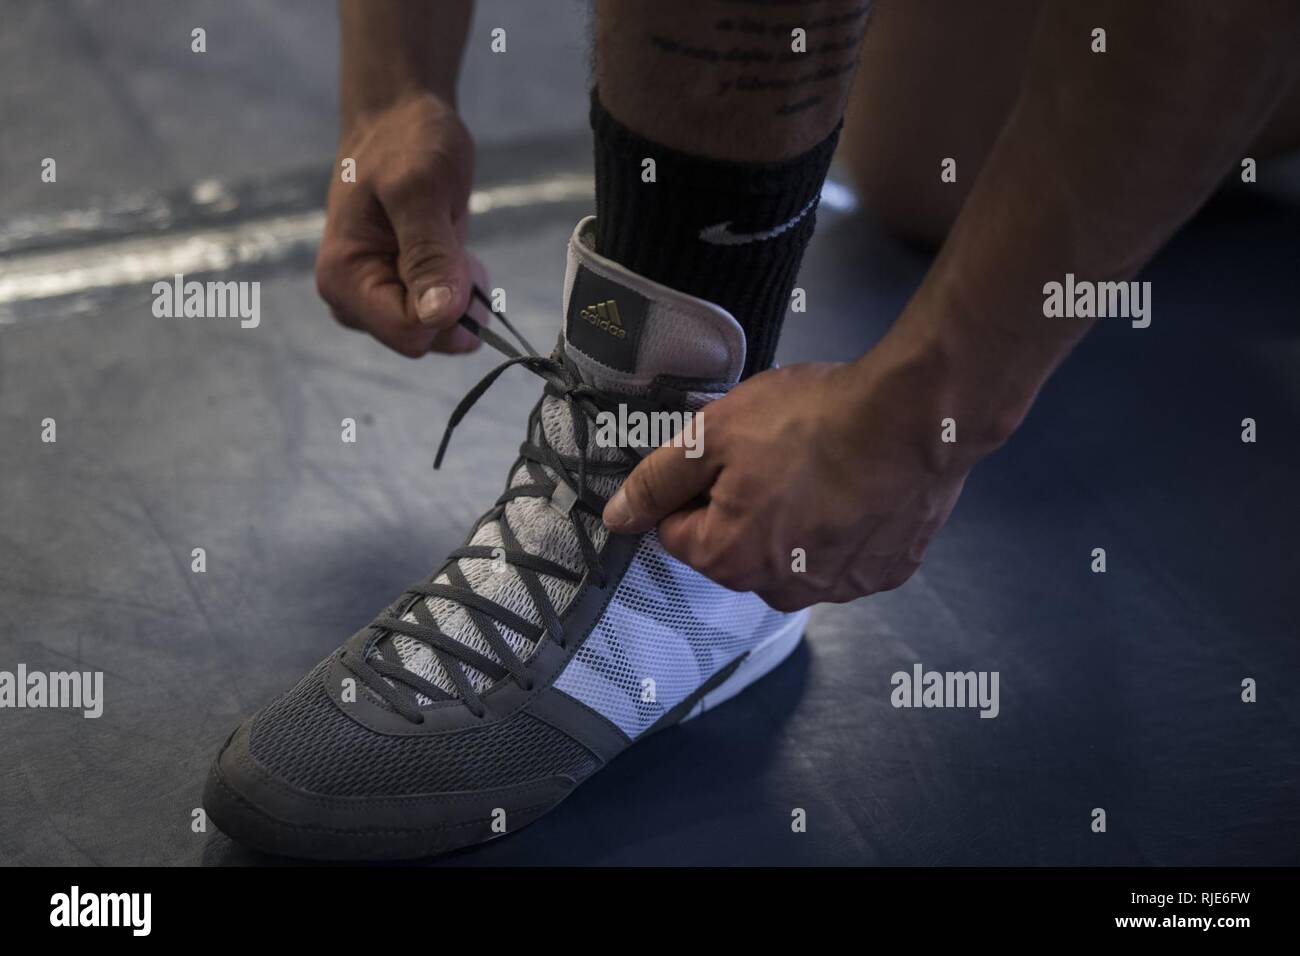 Airman 1st Class Raul Veliz, U.S. Air Force Wrestling Team member, laces up his wrestling shoes prior to practice at Joint Base McGuire-Dix-Lakehurst, N.J., Jan. 2018. The Air Force Wrestling Team has been training for the Armed Forces Wrestling Championship at Marine Corps Base Camp Lejeune, N.C. ( U.S. Air Force Stock Photo